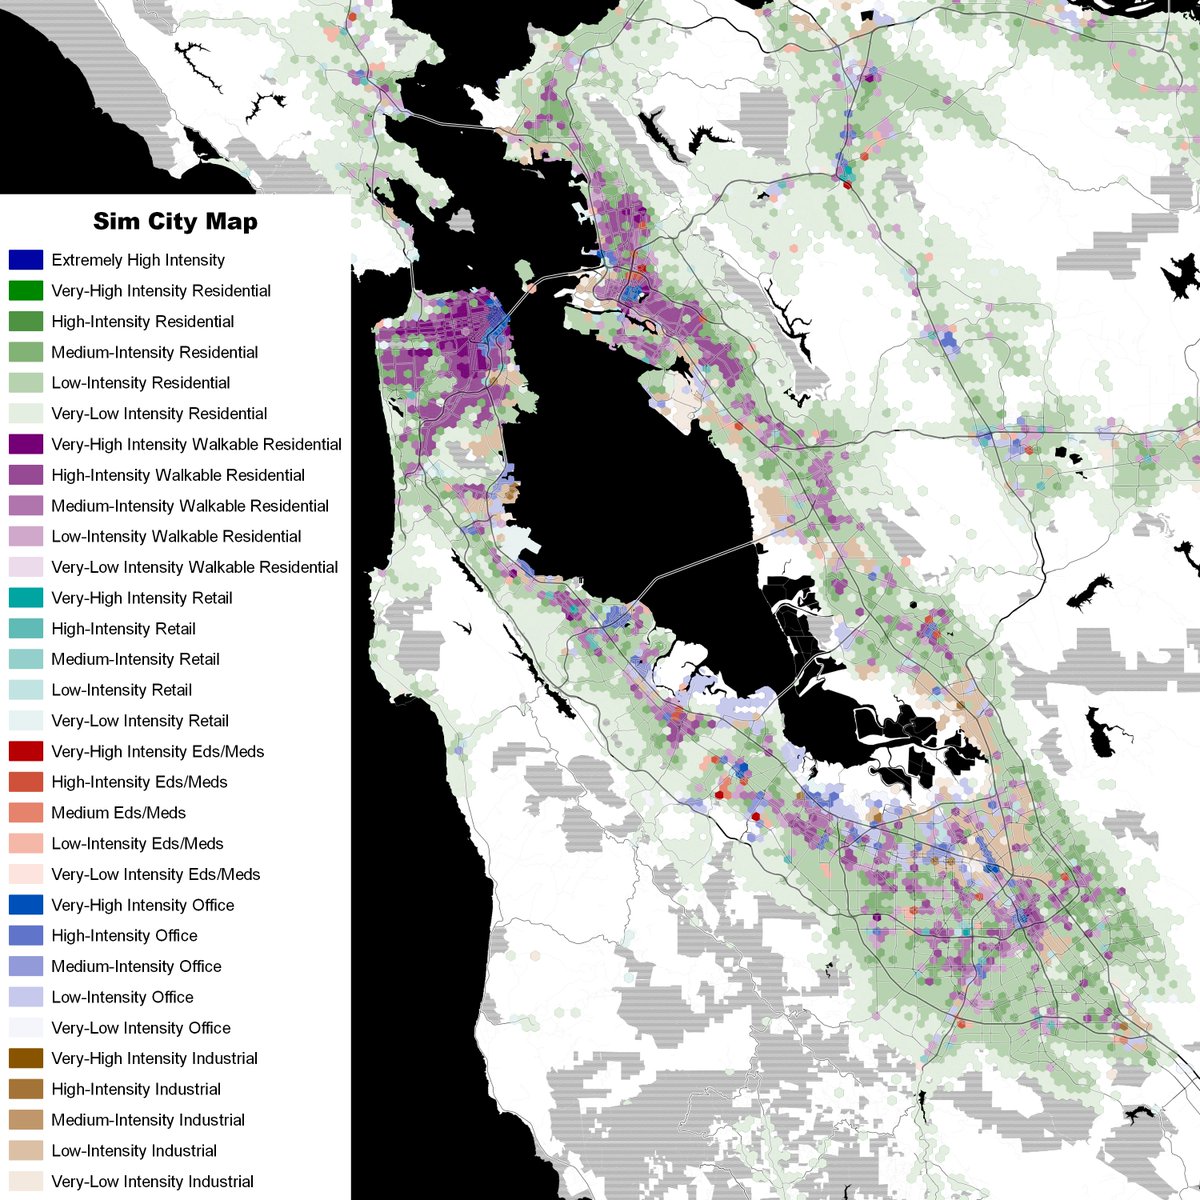 San Francisco is interesting because it gives us a look at actual pre-War urbanism in San Francisco/Oakland, and then sprawl masquerading as the second largest city in California to the south.